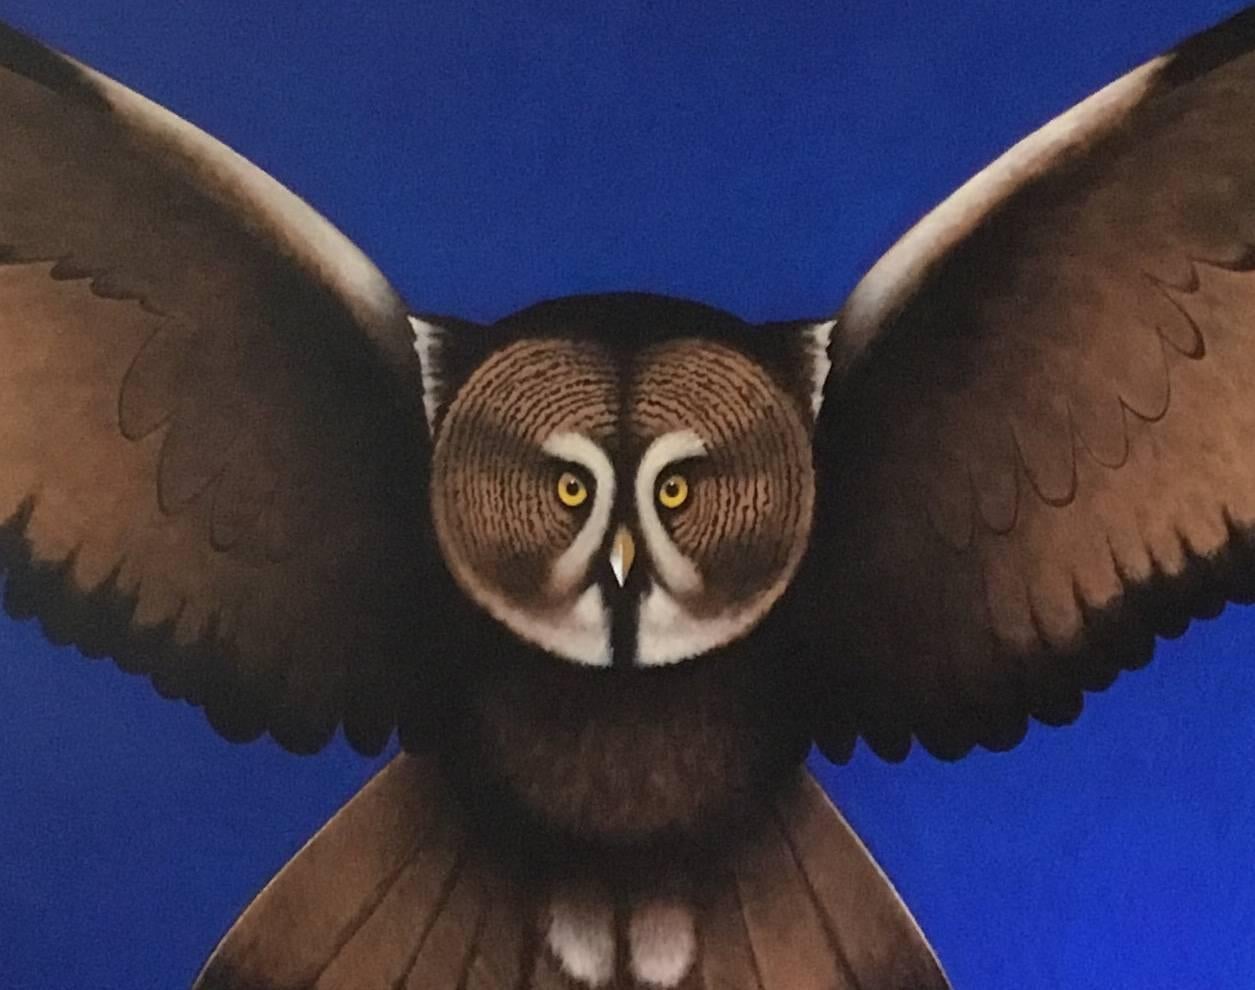 Owl
Original painting by Lynn Curlee, professional artist and author/illustrator of award winning picture books for children.
Acrylic on stretched canvas. The canvas is stretched around the edges which are painted so that framing is